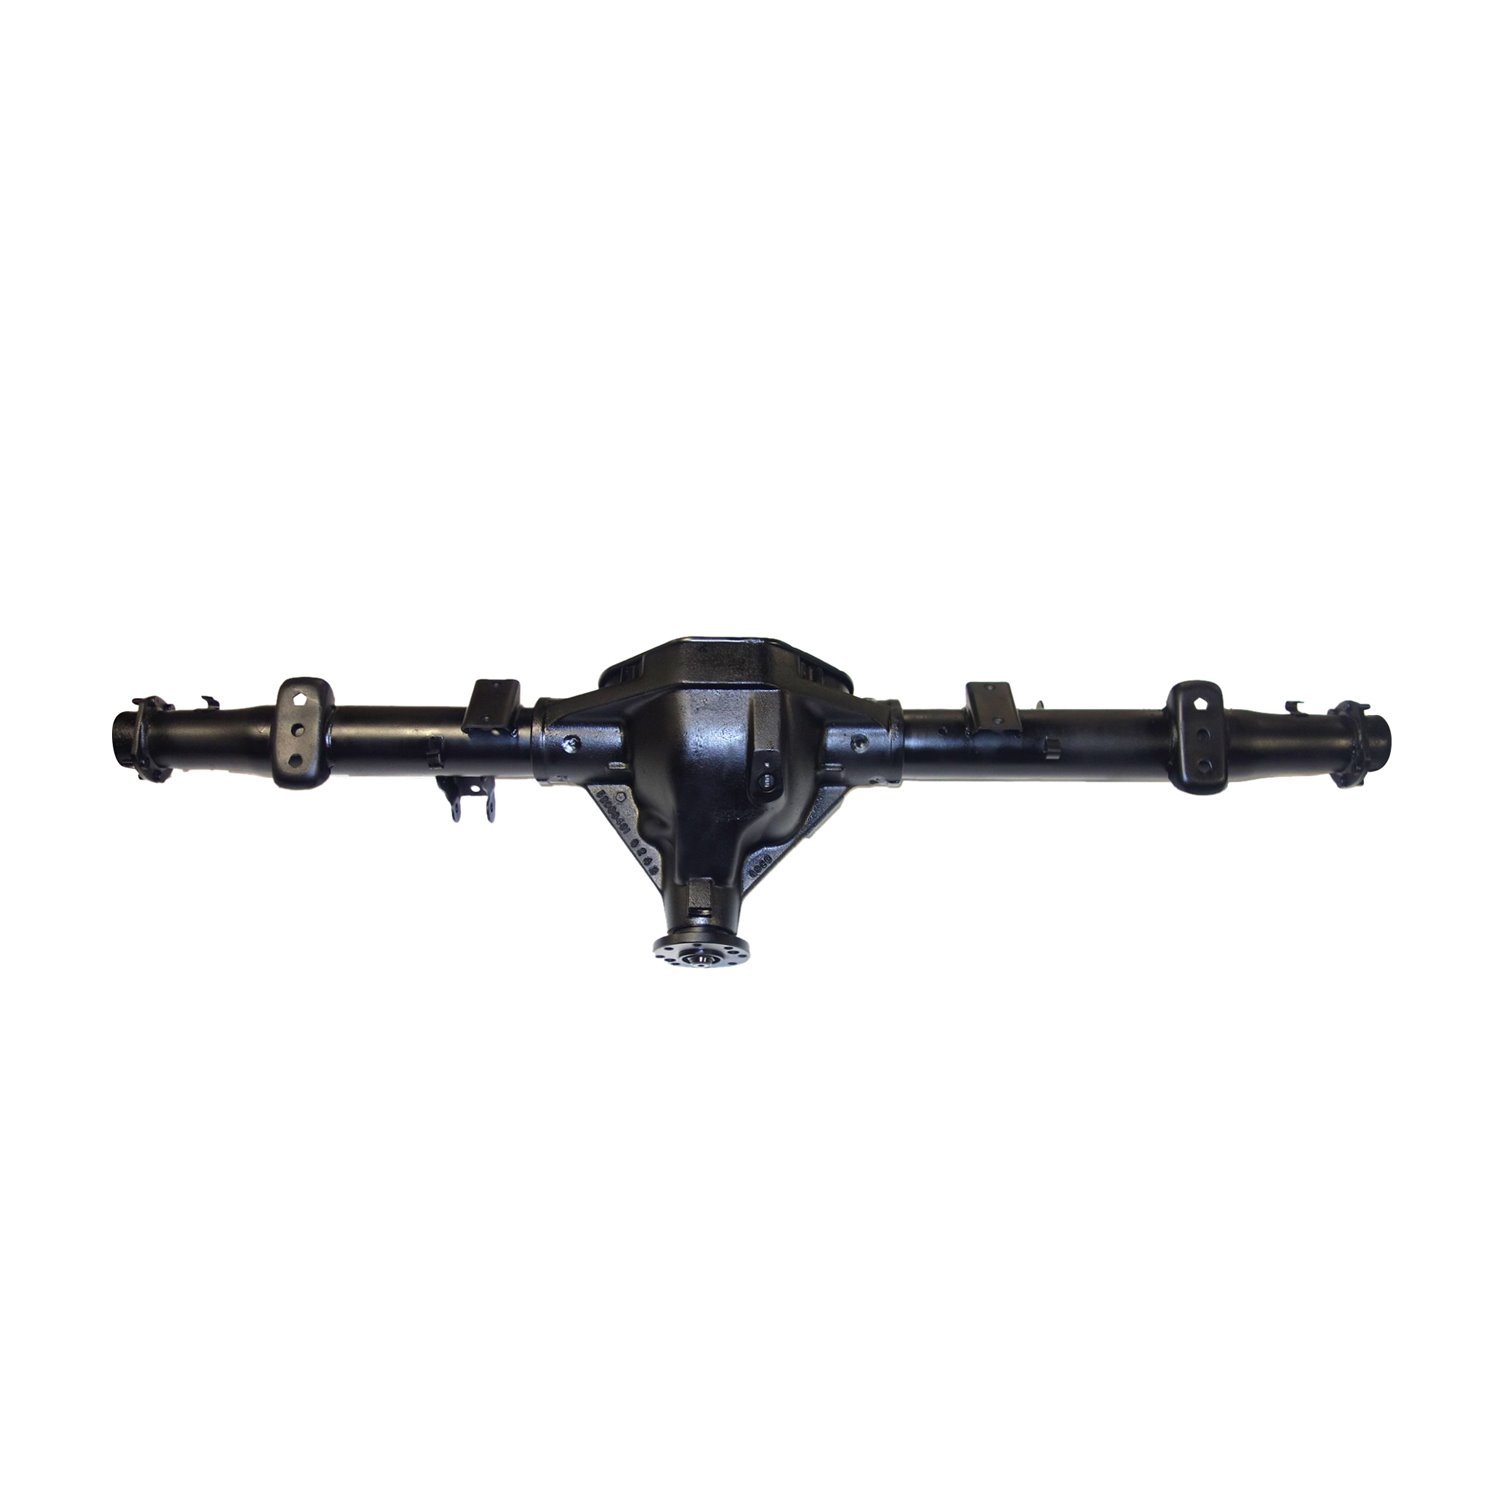 Remanufactured Axle Assy for Chy 9.25" 04-05 Dodge Durango 3.55 , 4x4 w/ Traction Control